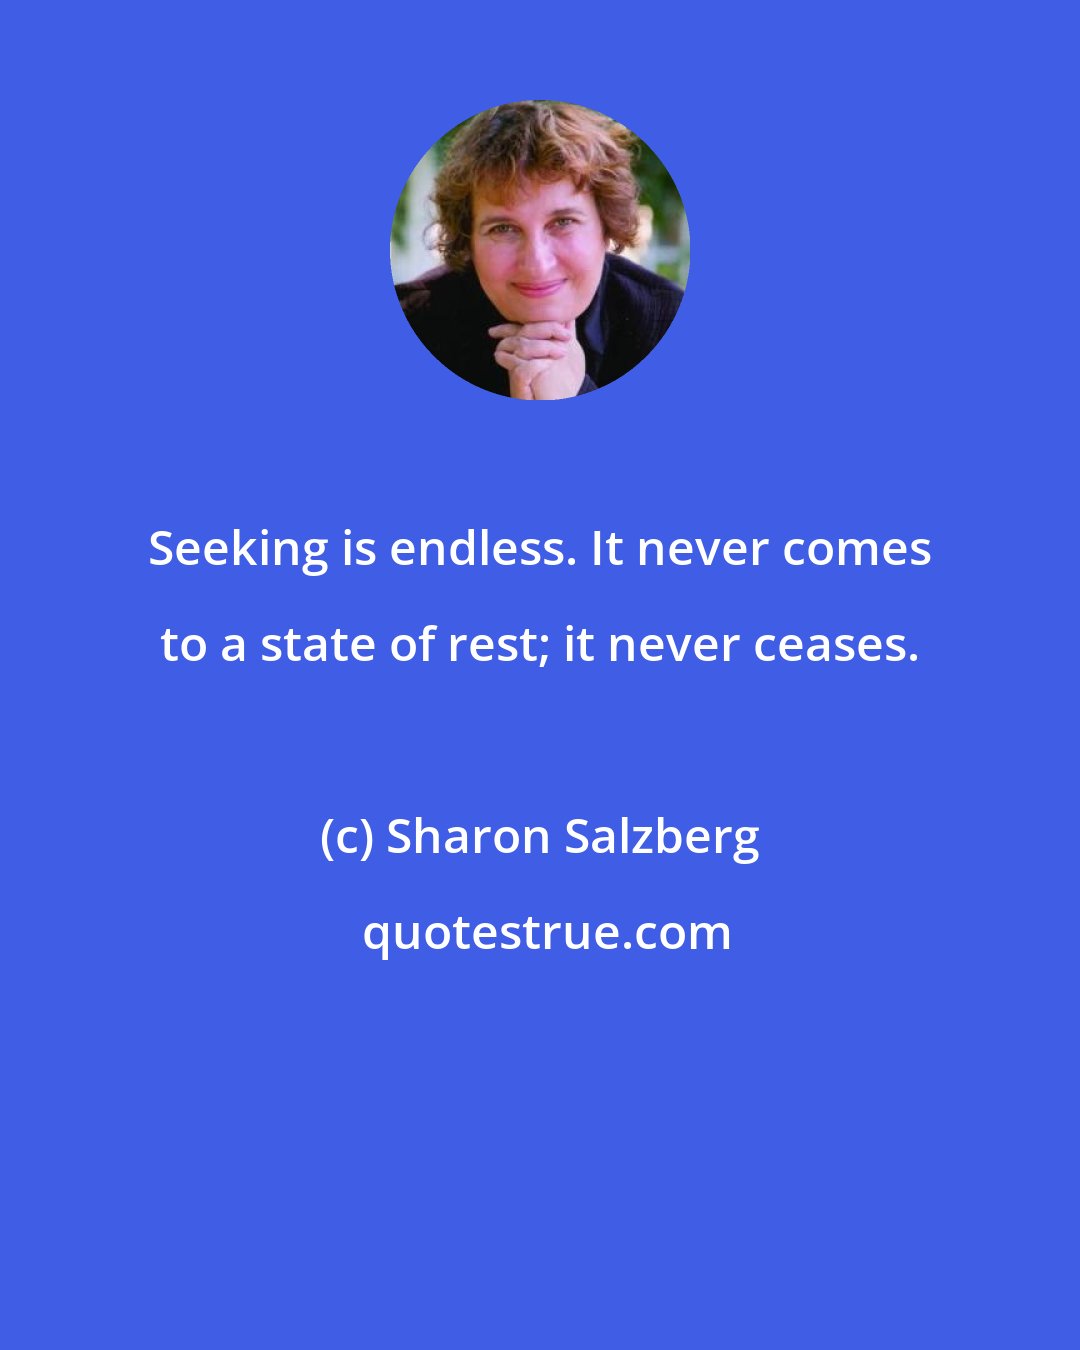 Sharon Salzberg: Seeking is endless. It never comes to a state of rest; it never ceases.